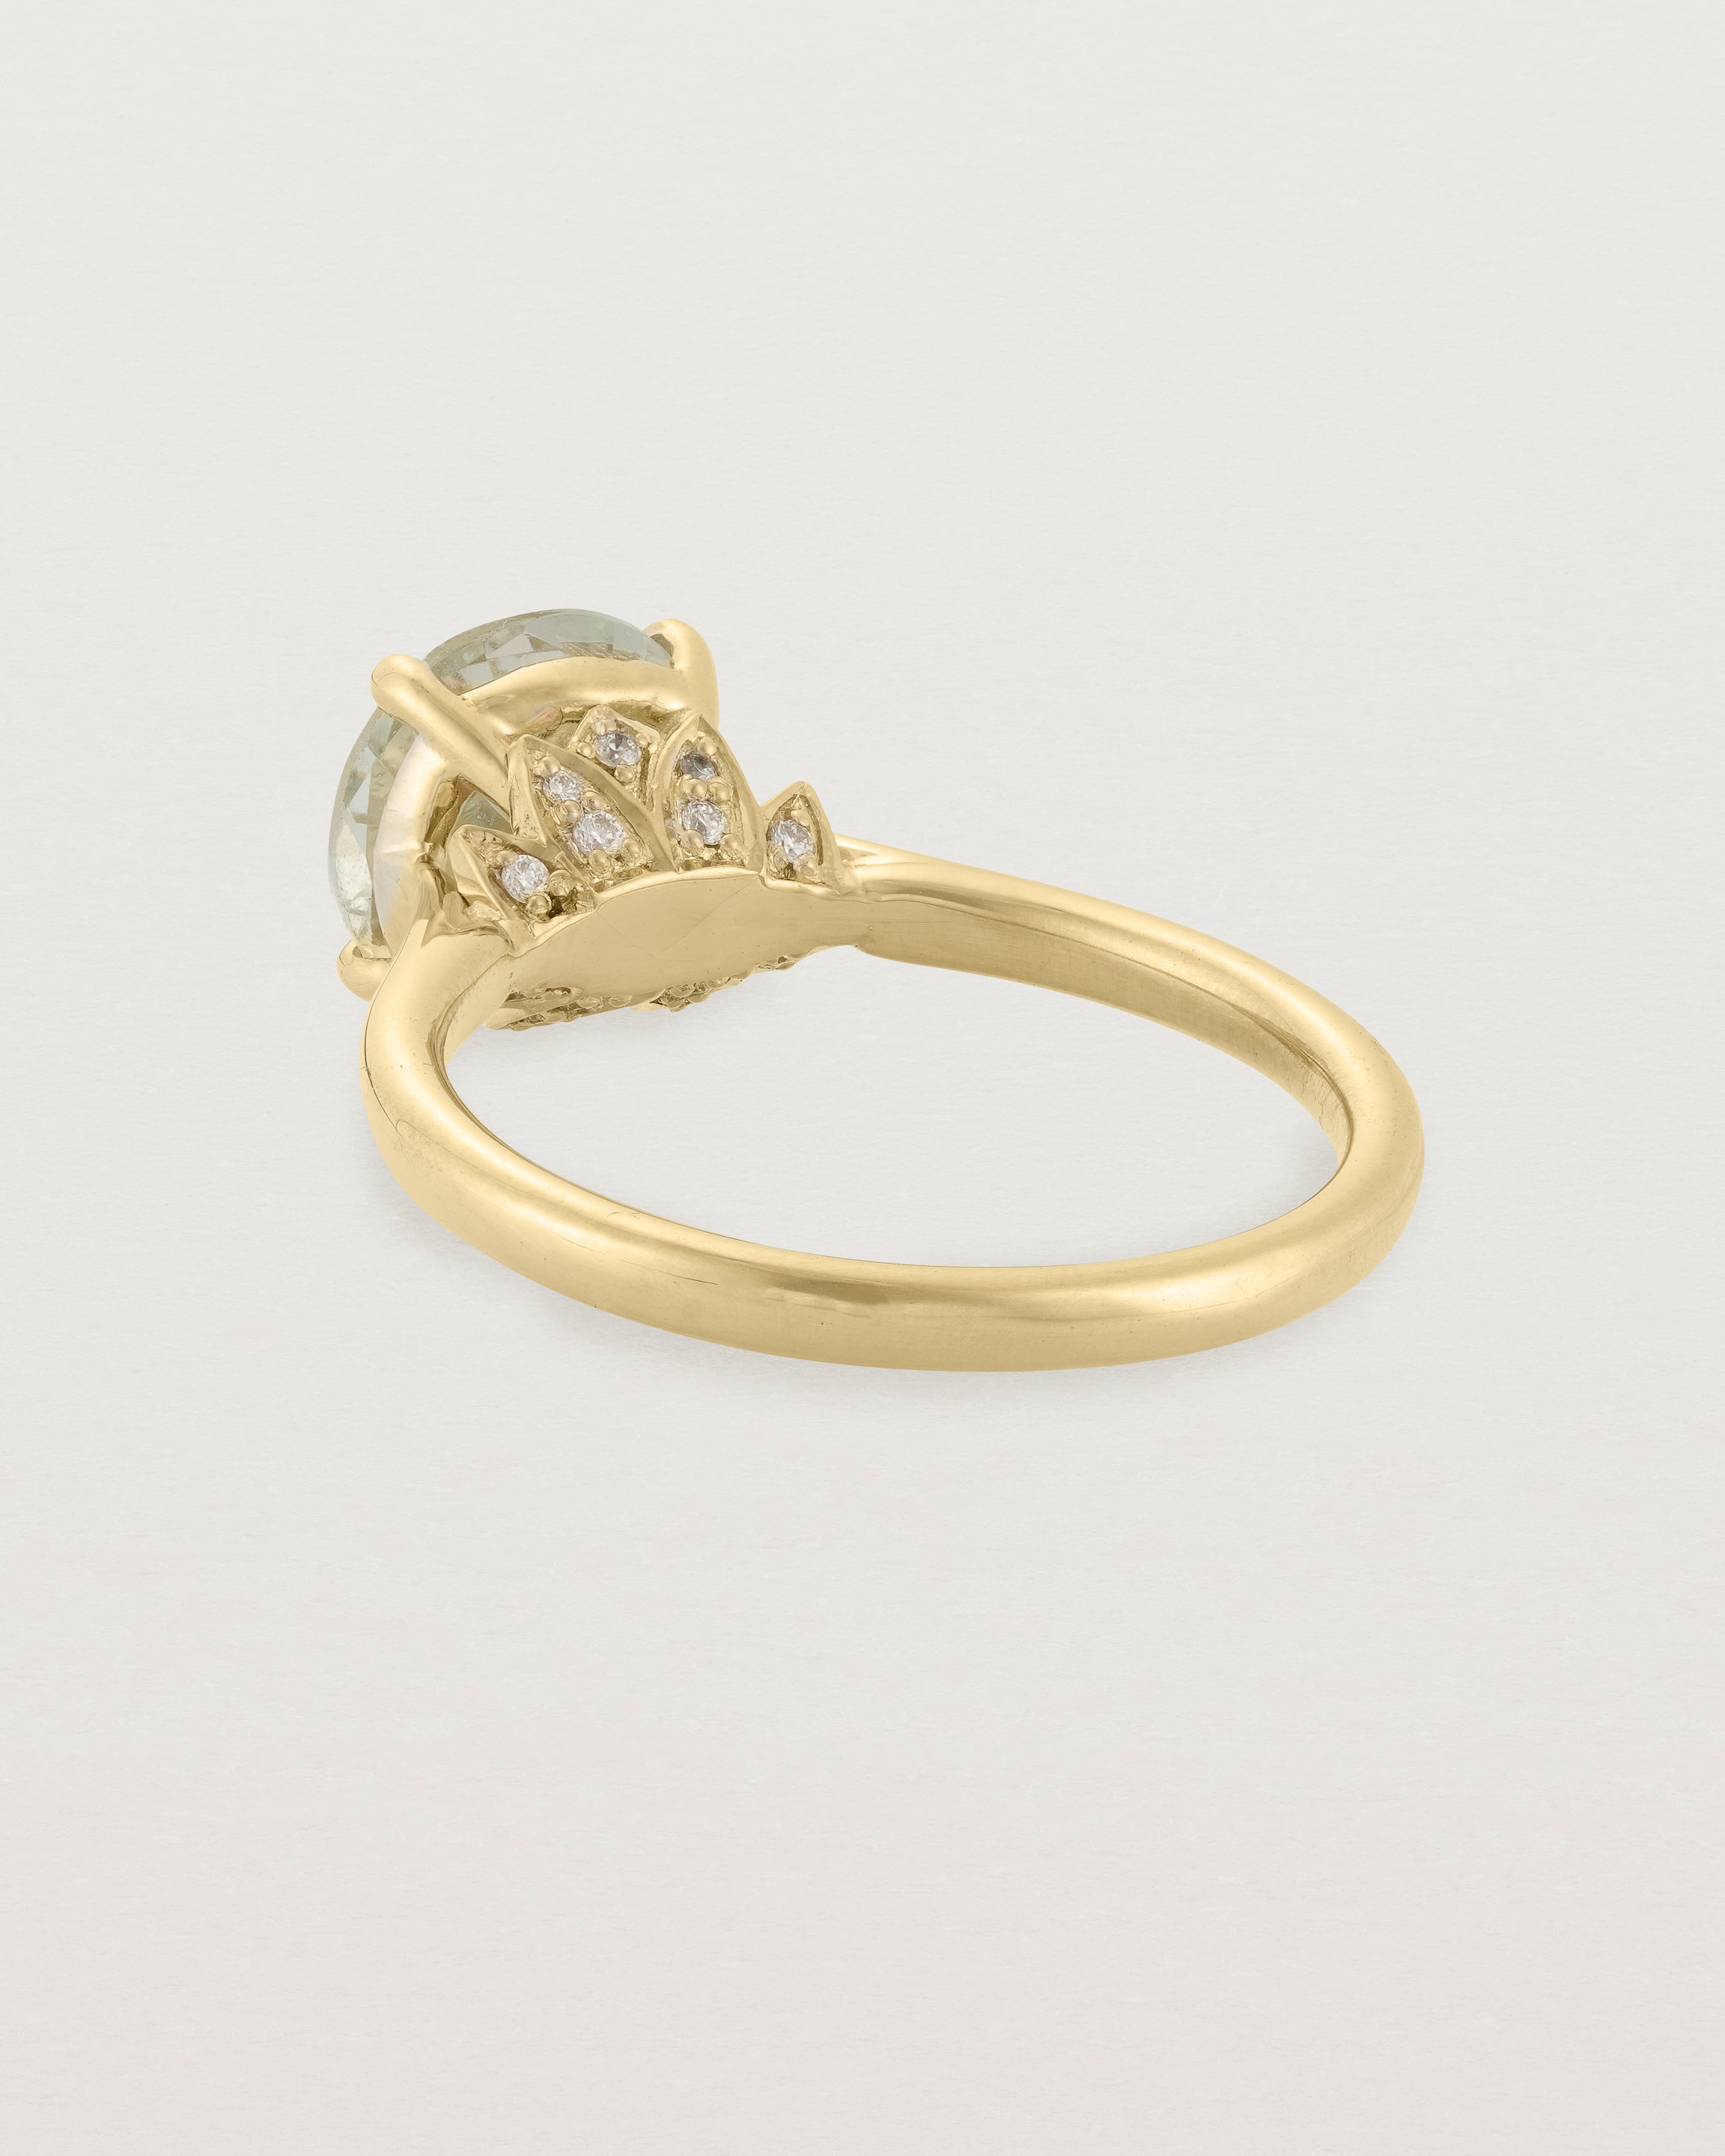 Back view of the Kalina Round Solitaire | Green Amethyst | Yellow Gold.